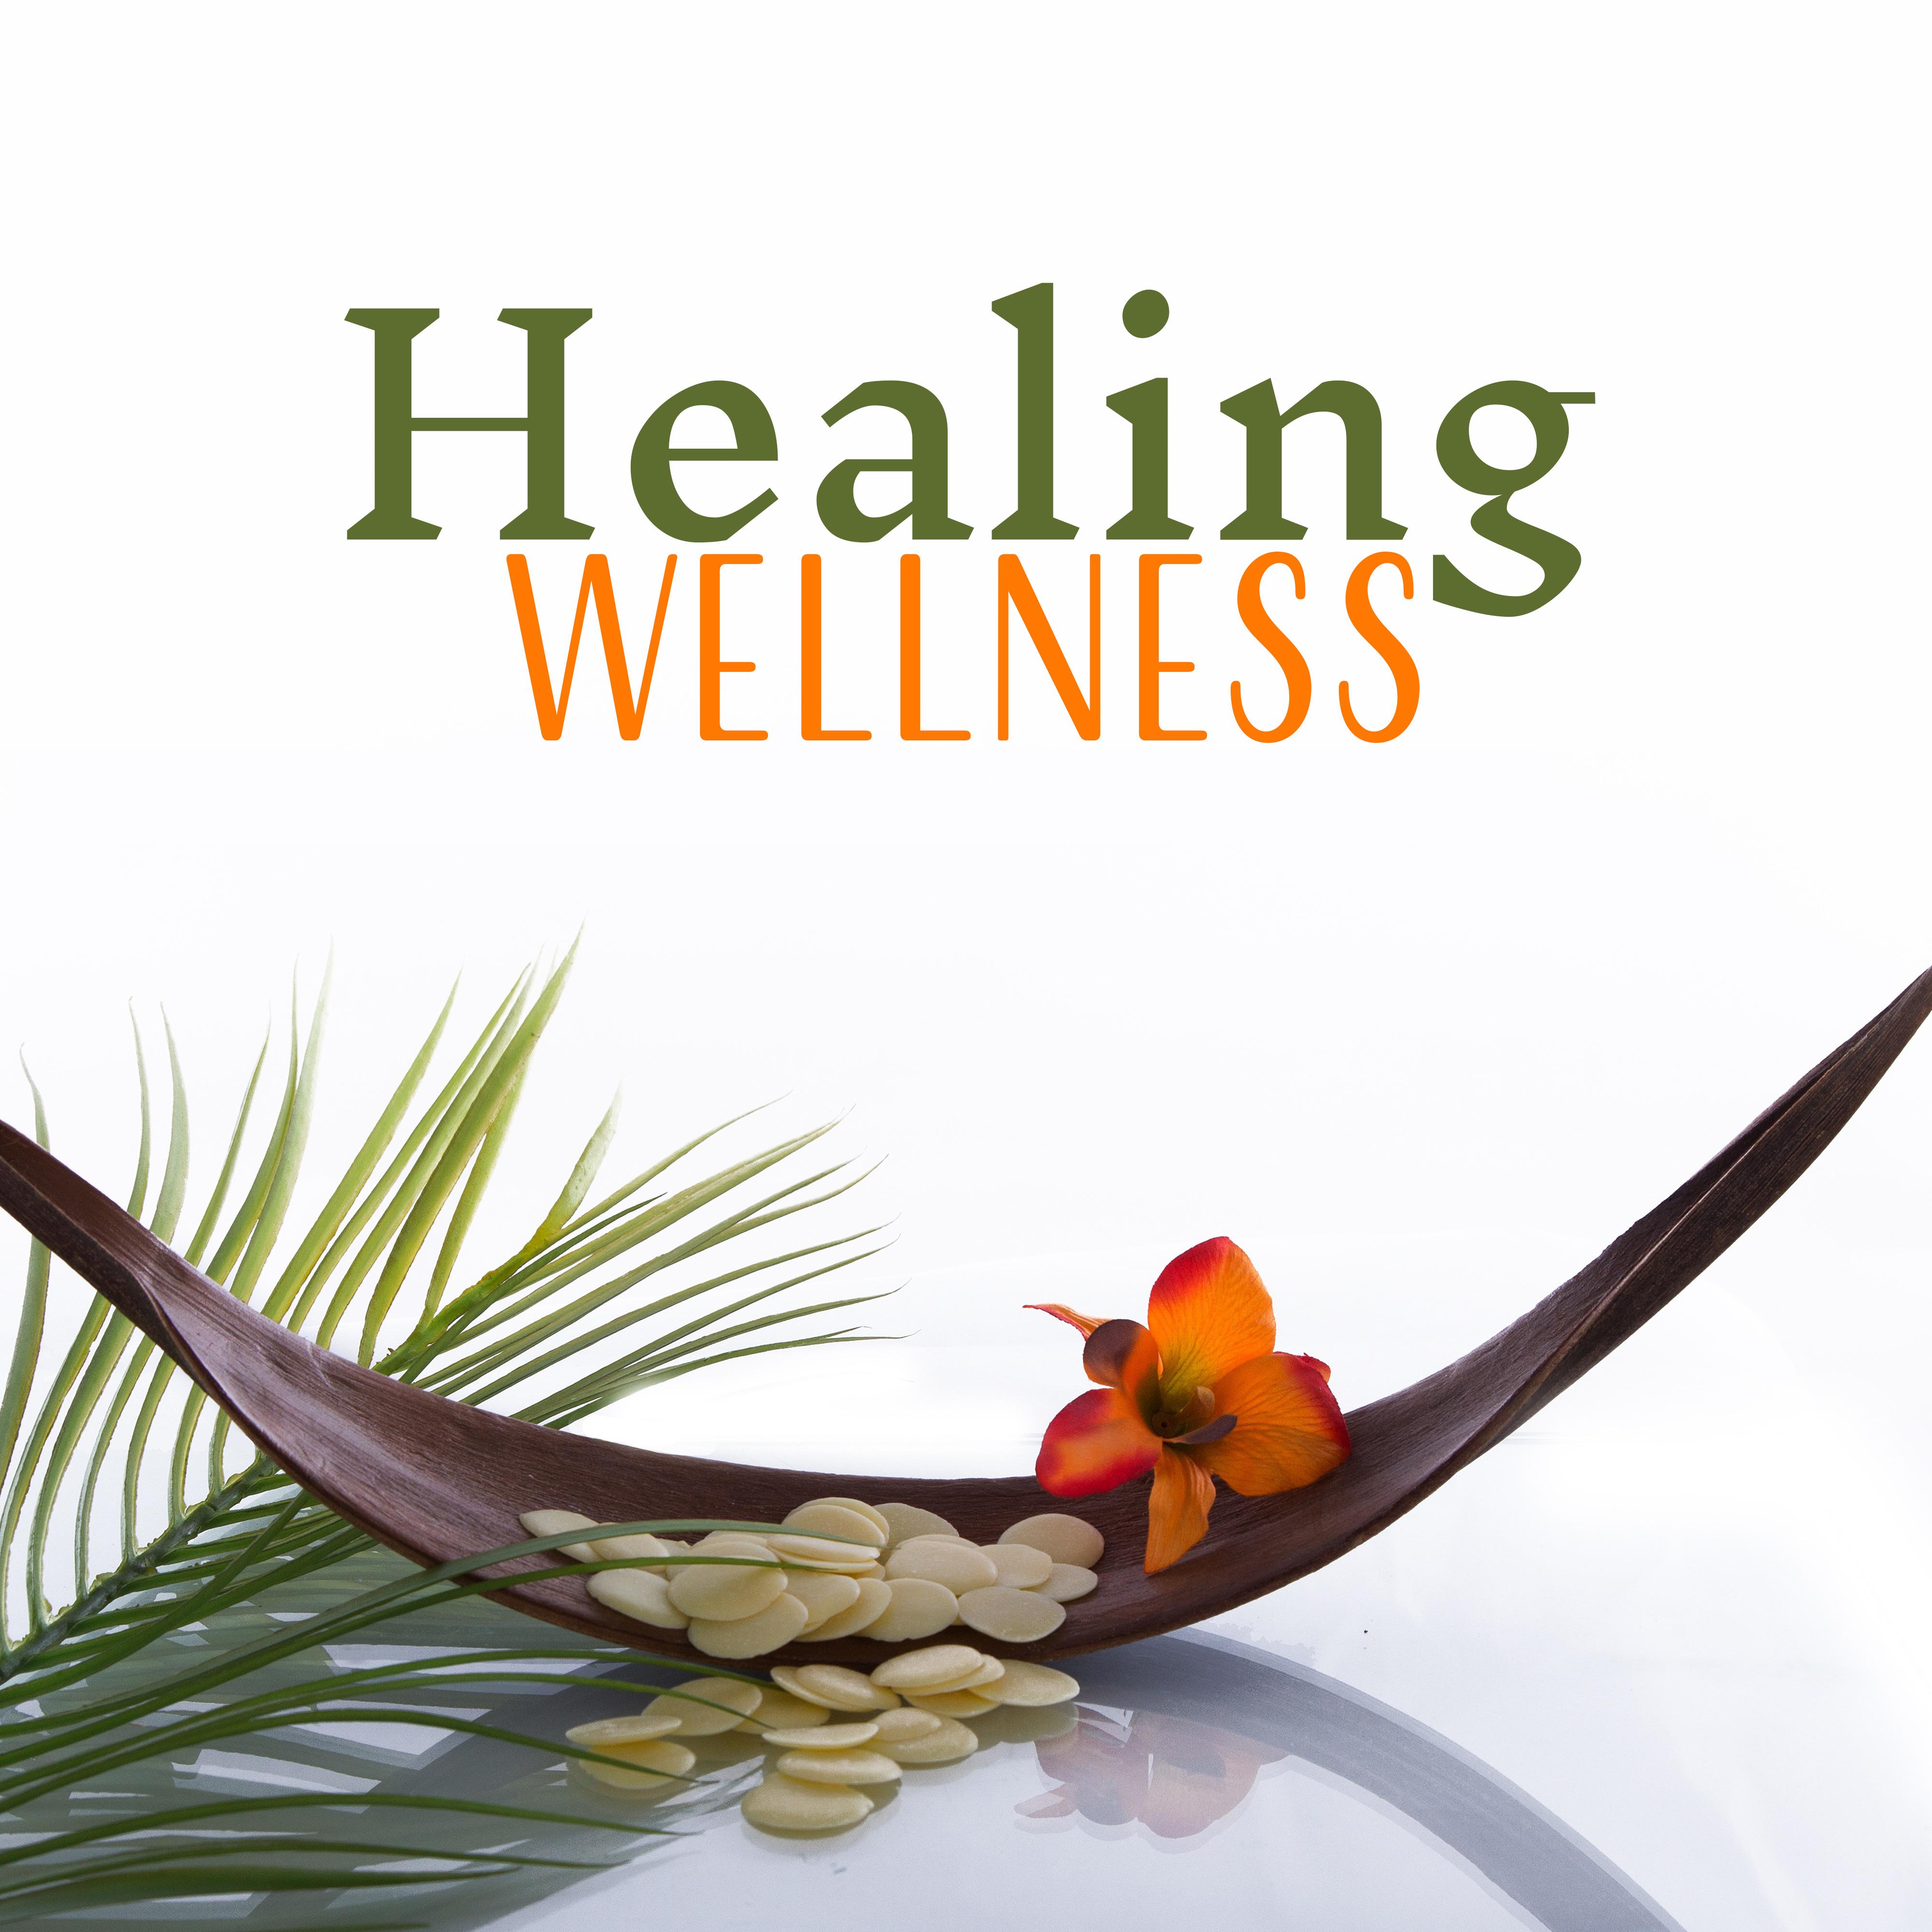 Healing Wellness – Relaxation Music for Spa, Massage, Stress Relief, Pure Waves, Soothing Sounds for Rest